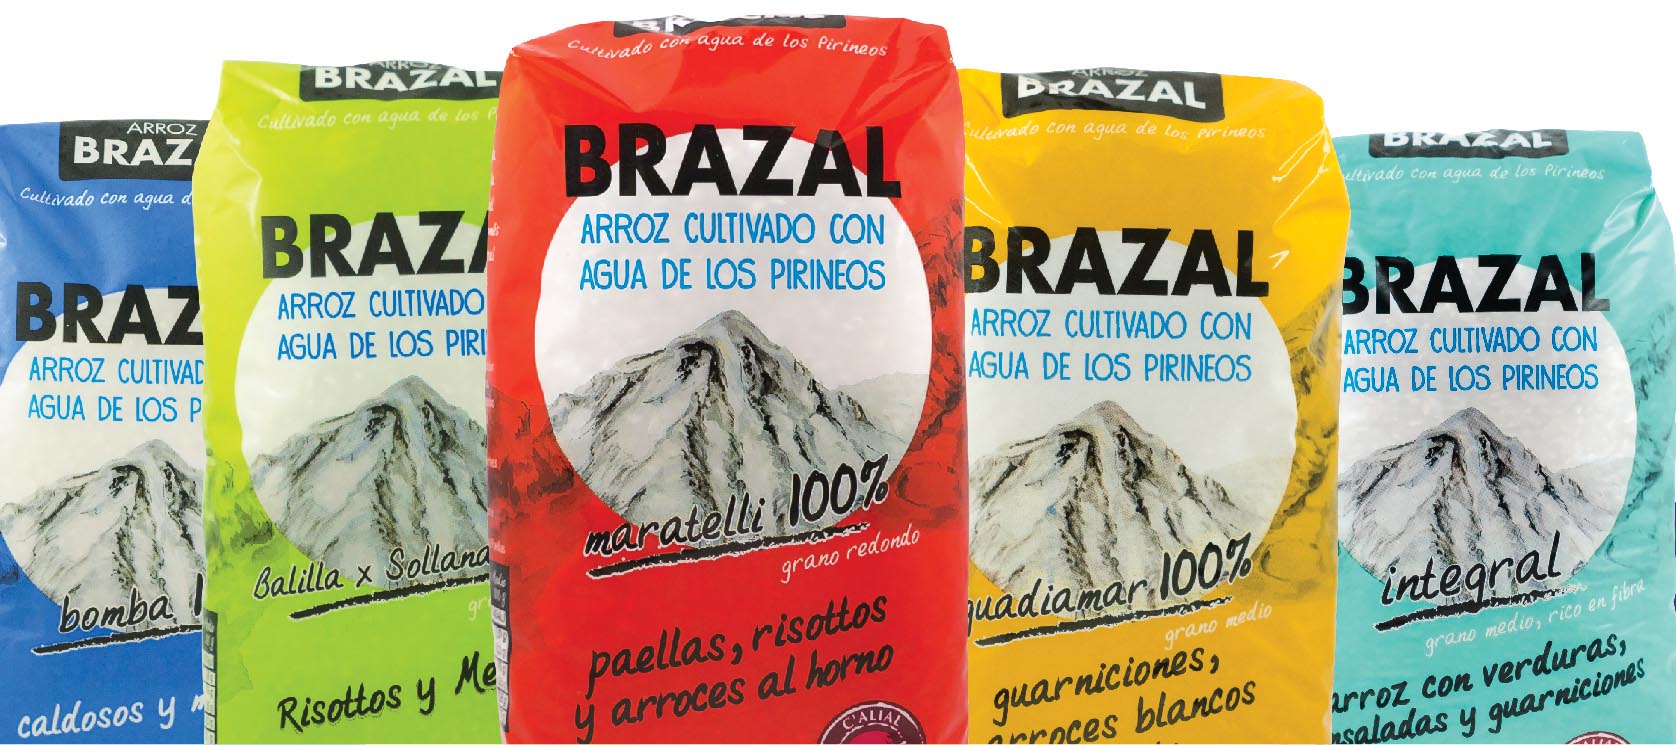 Rice from Aragon, a high-altitude product